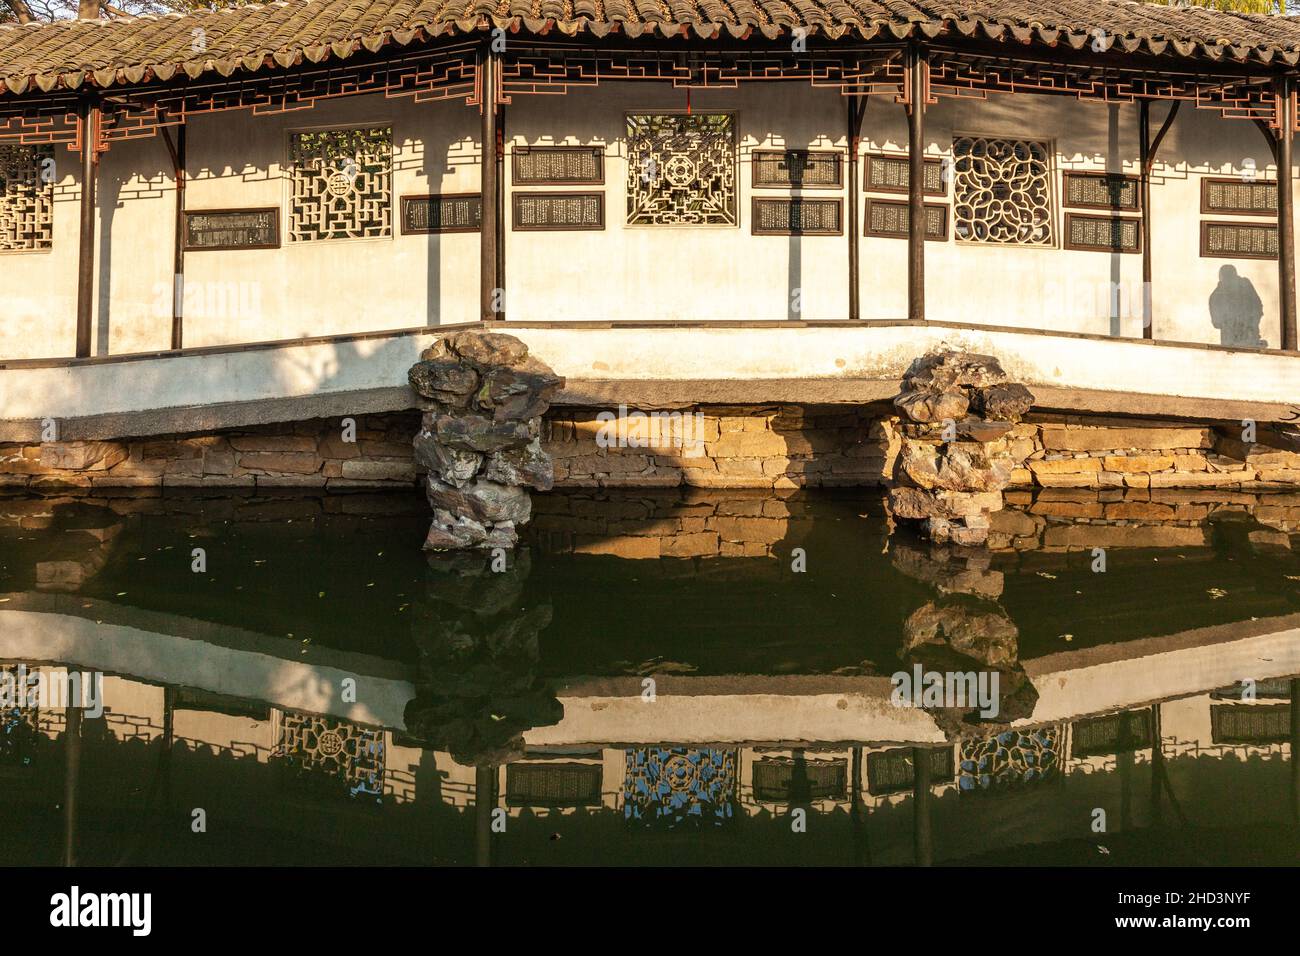 Pavilion and gallery of the Garden of the Master of the Nets in Suzhou, China Stock Photo